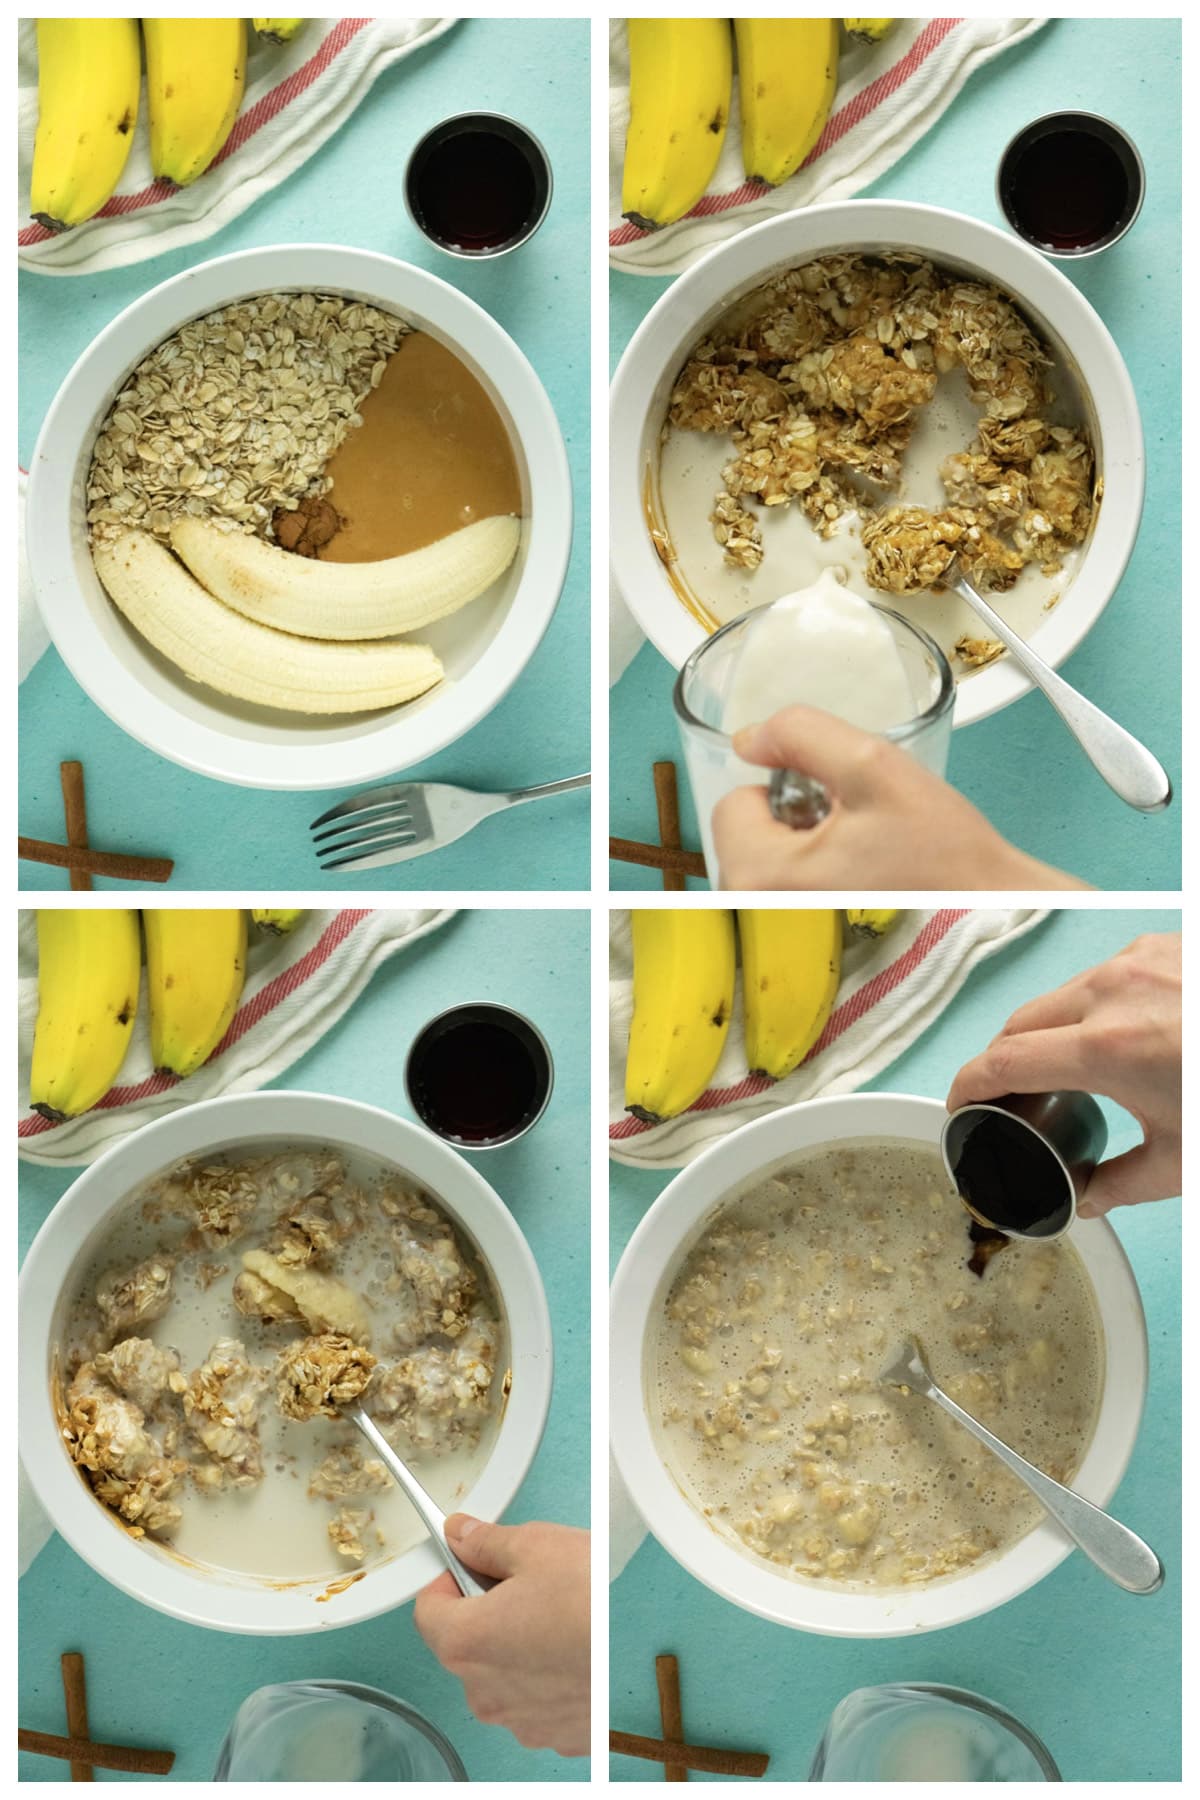 image collage showing the process of mashing the overnight oats ingredients in the mixing bowl